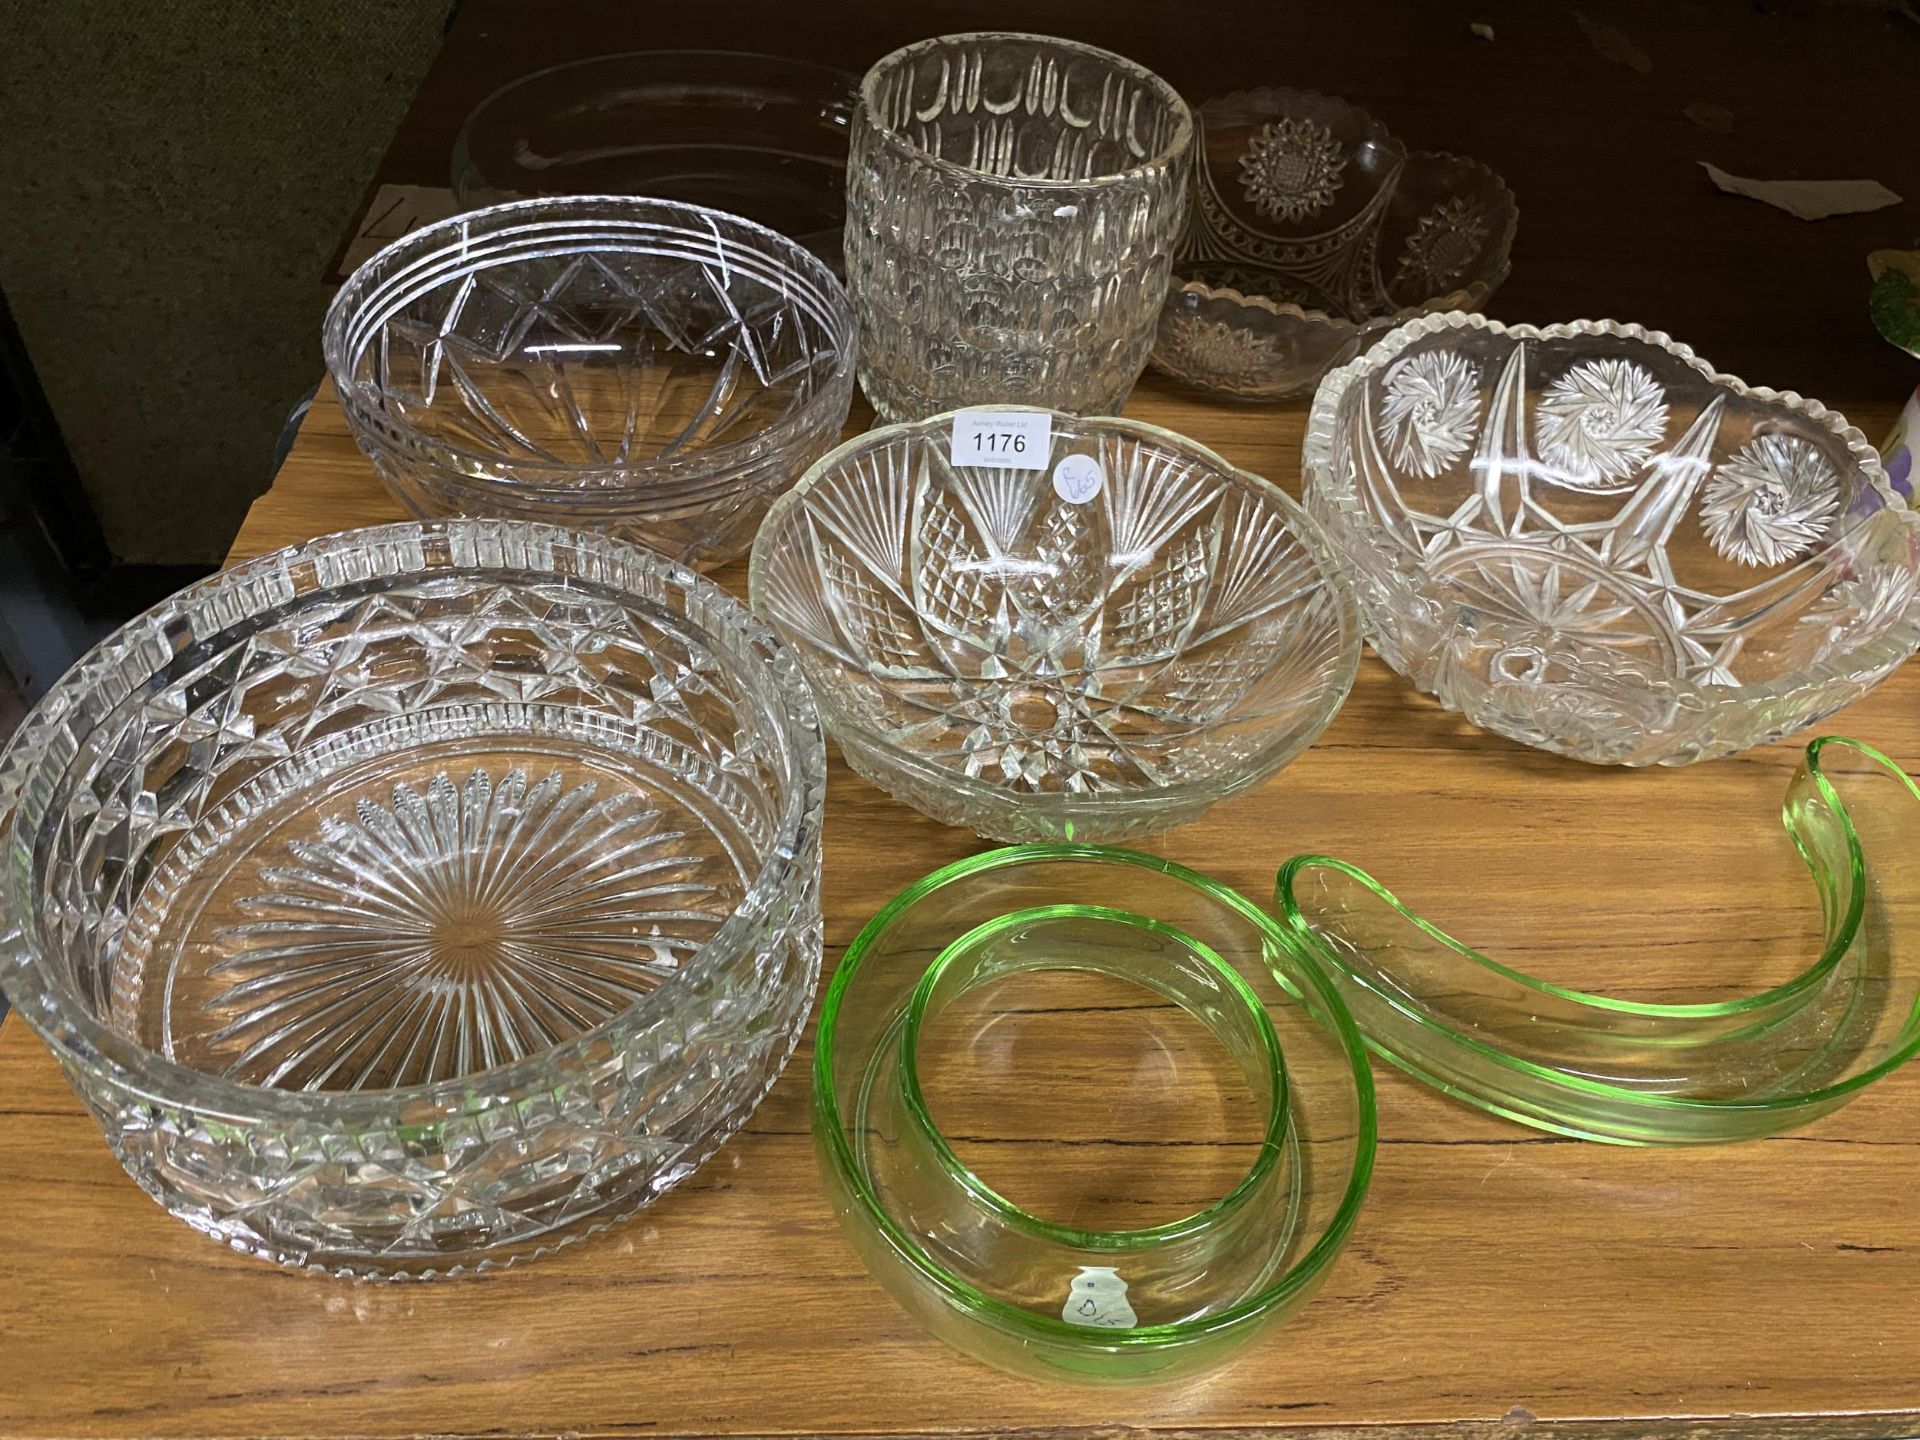 A MIXED LOT OF GLASSWARE, FRUIT BOWLS ETC